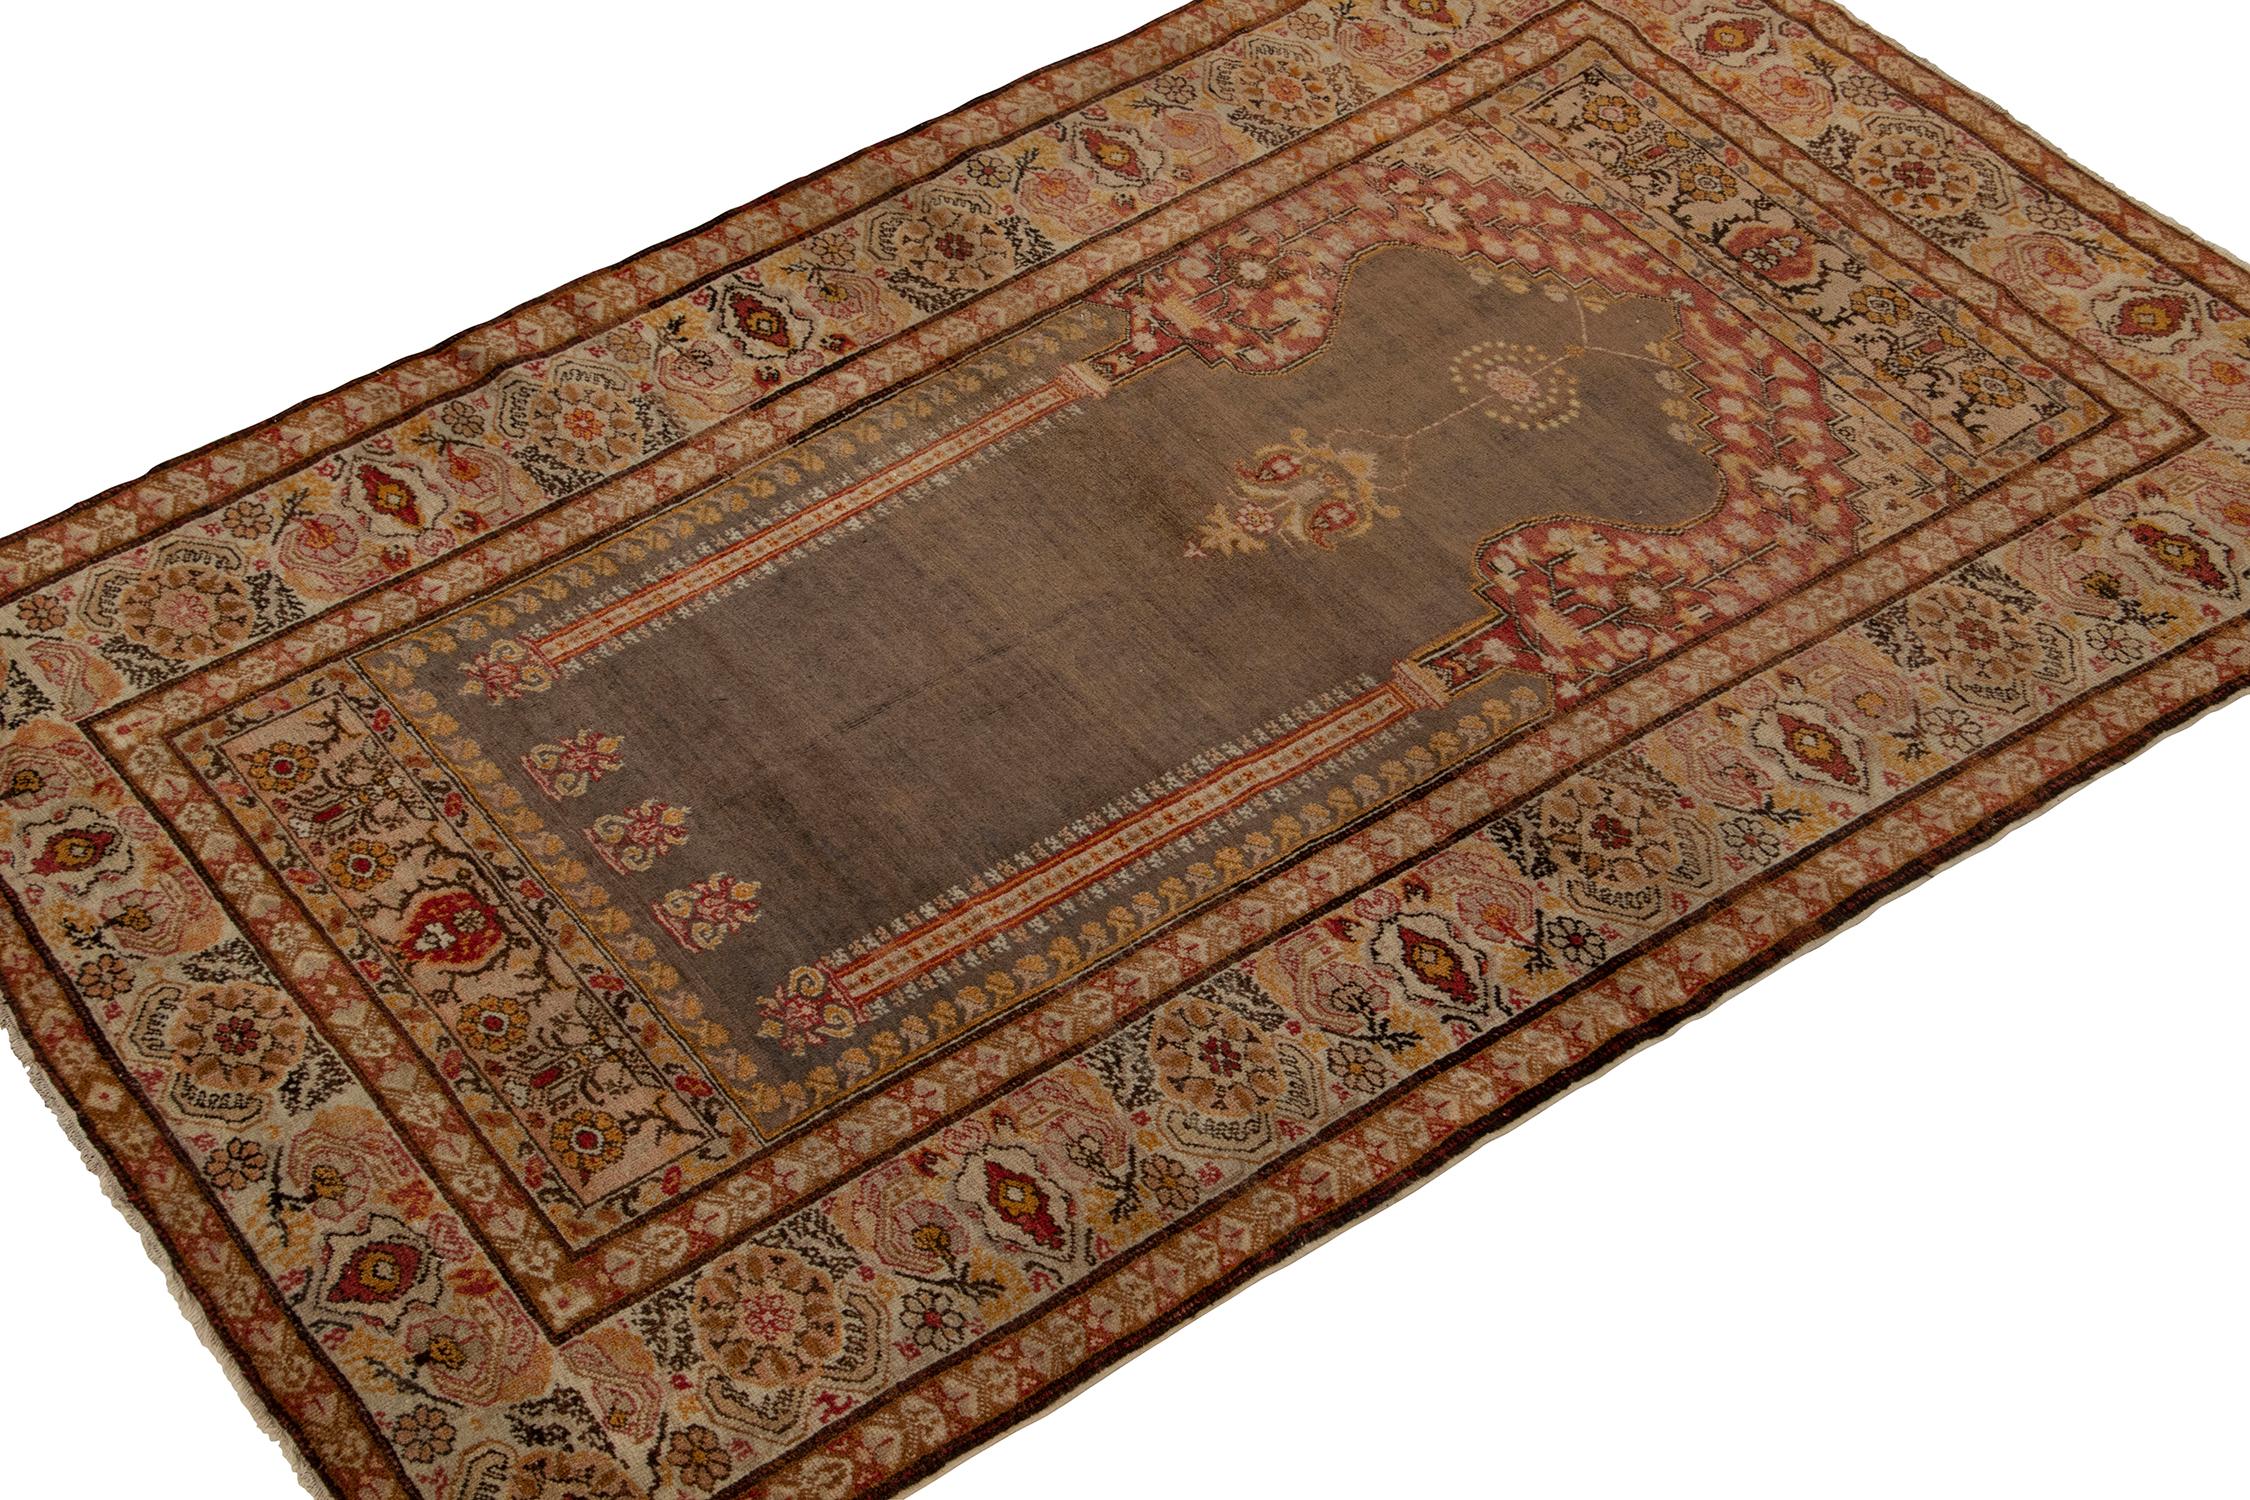 An antique 5x7 Kayseri rug from Rug & Kilim's rare classic curations. Hand-knotted in wool from Turkey circa 1920-1930.
Further on the Design:
The employment of rich red and gold reads so beautifully in the Mihrab pattern and floral border alike.